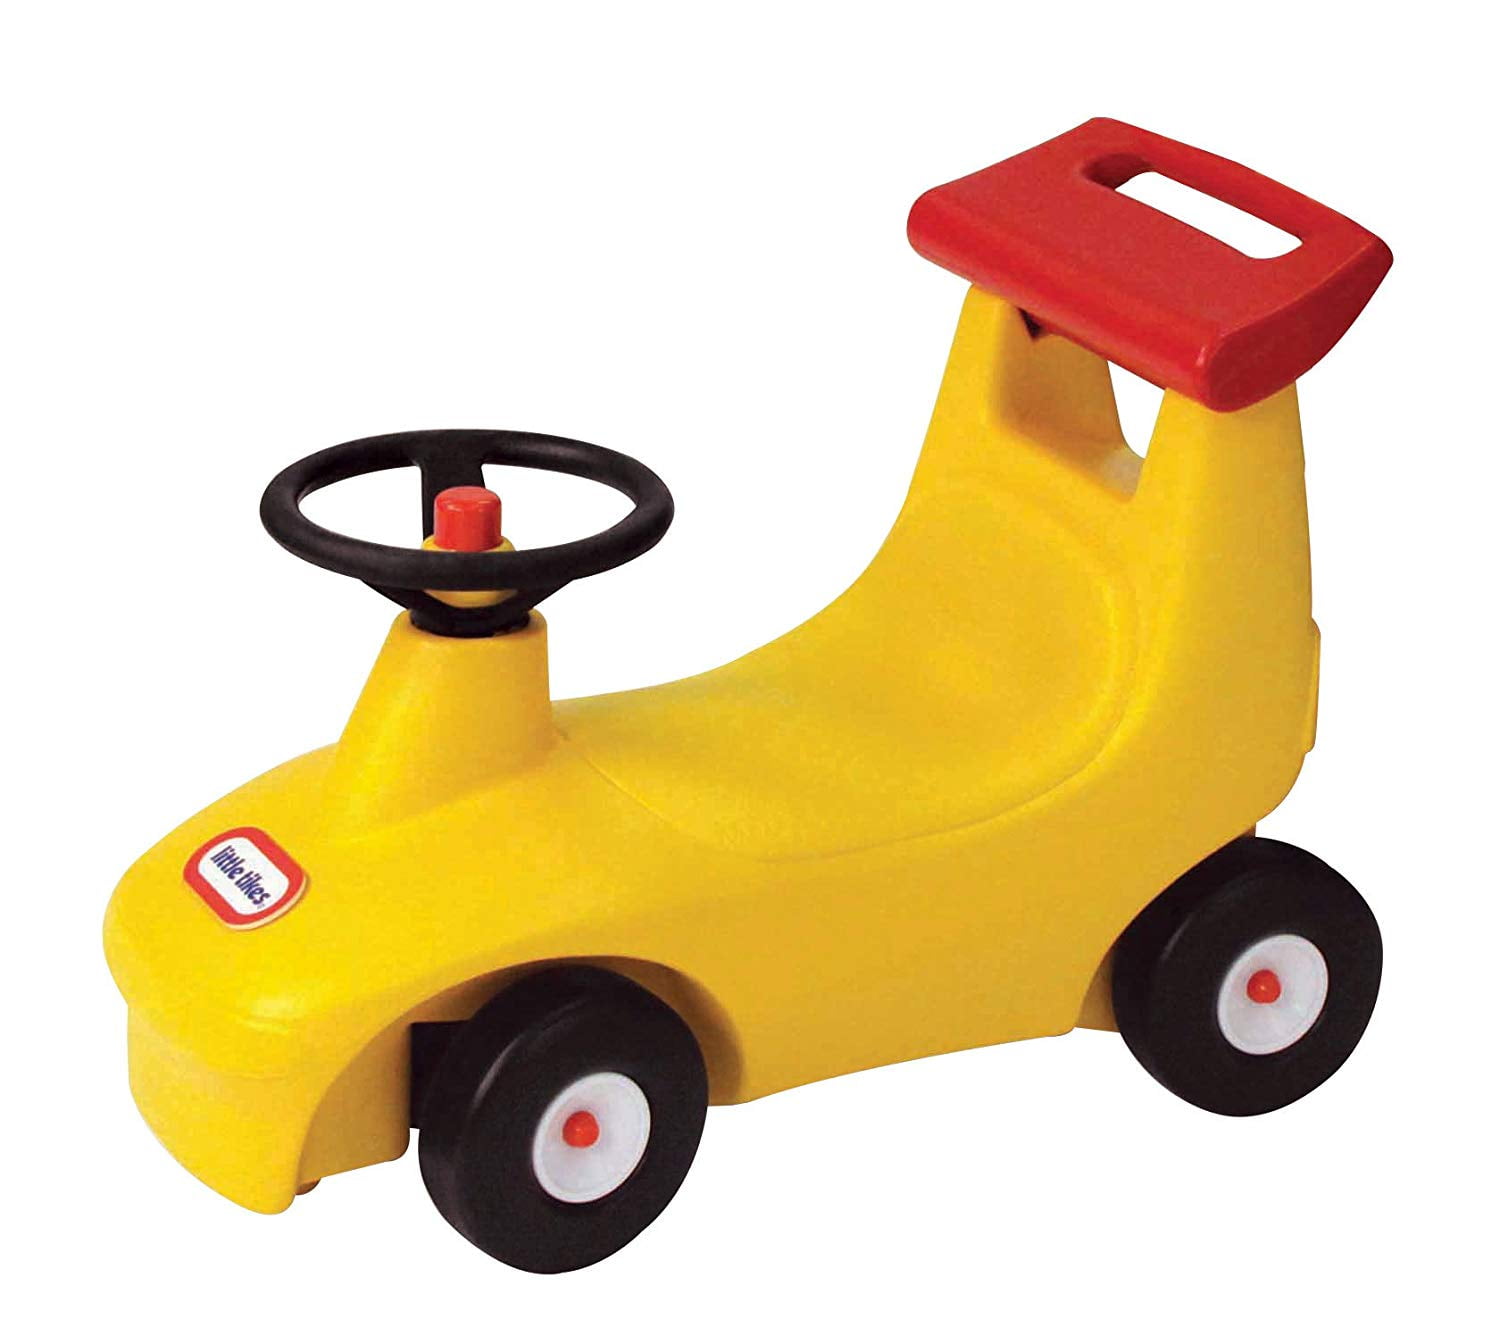 baby walker ride on toys